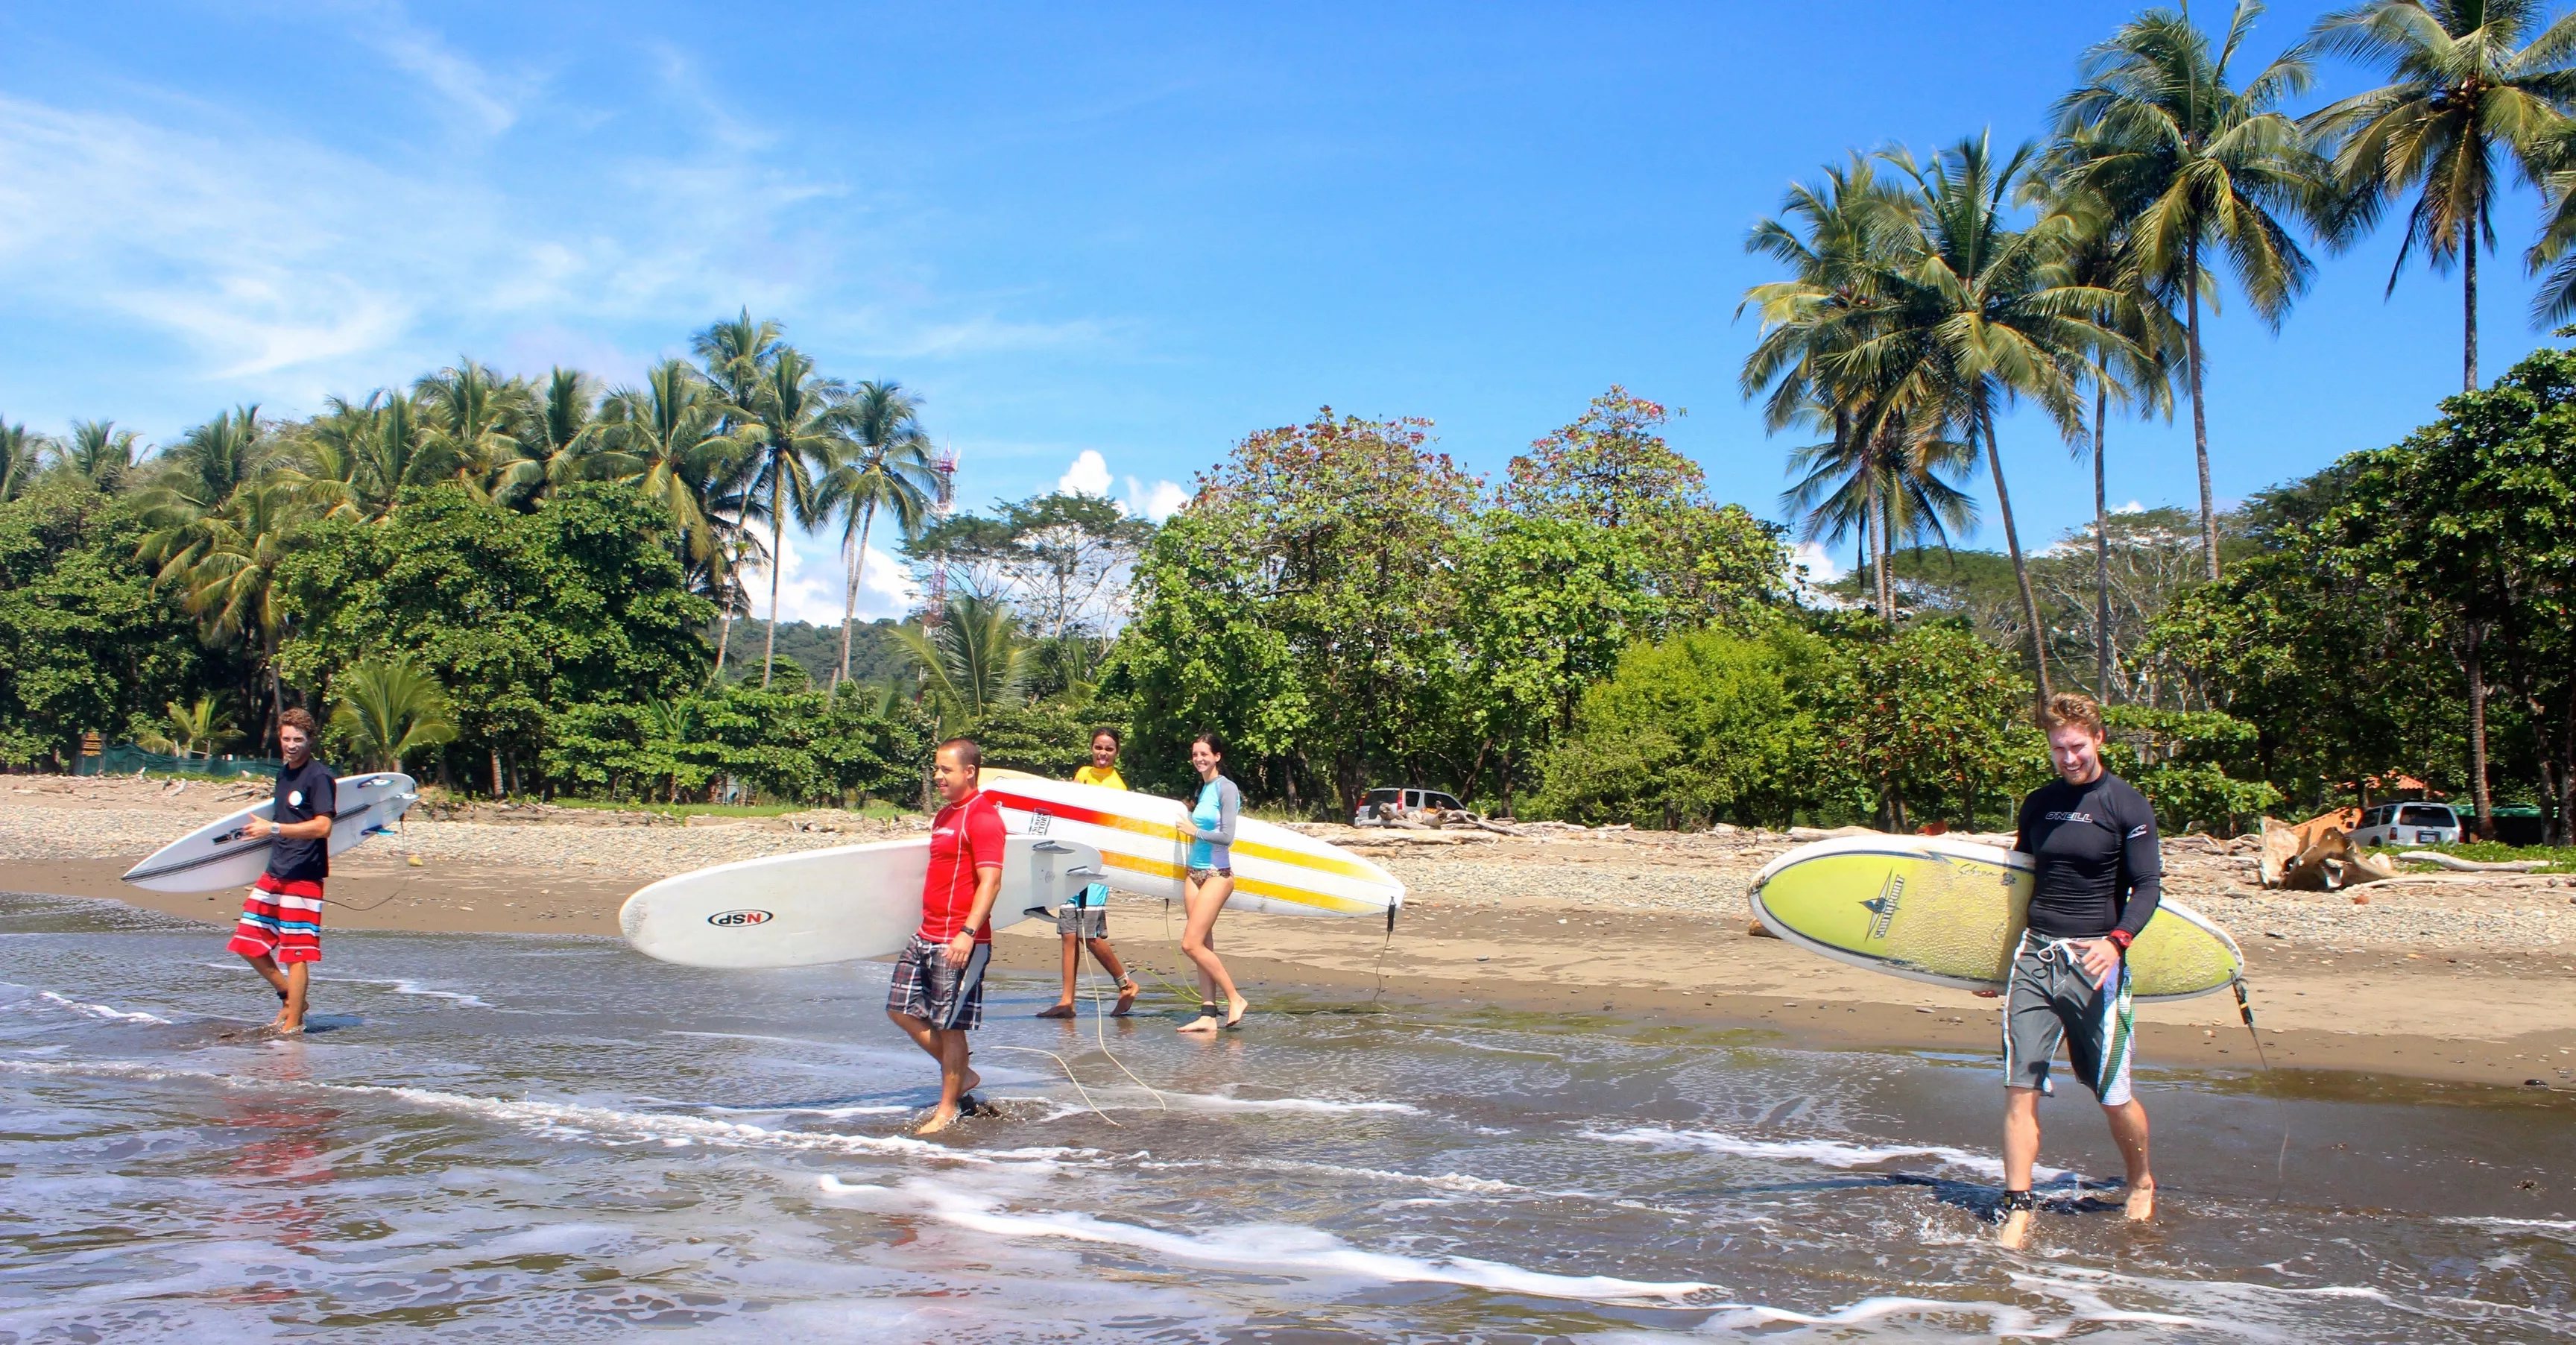 Dominical Waverider Surf School in Costa Rica, North America | Surfing - Rated 3.9